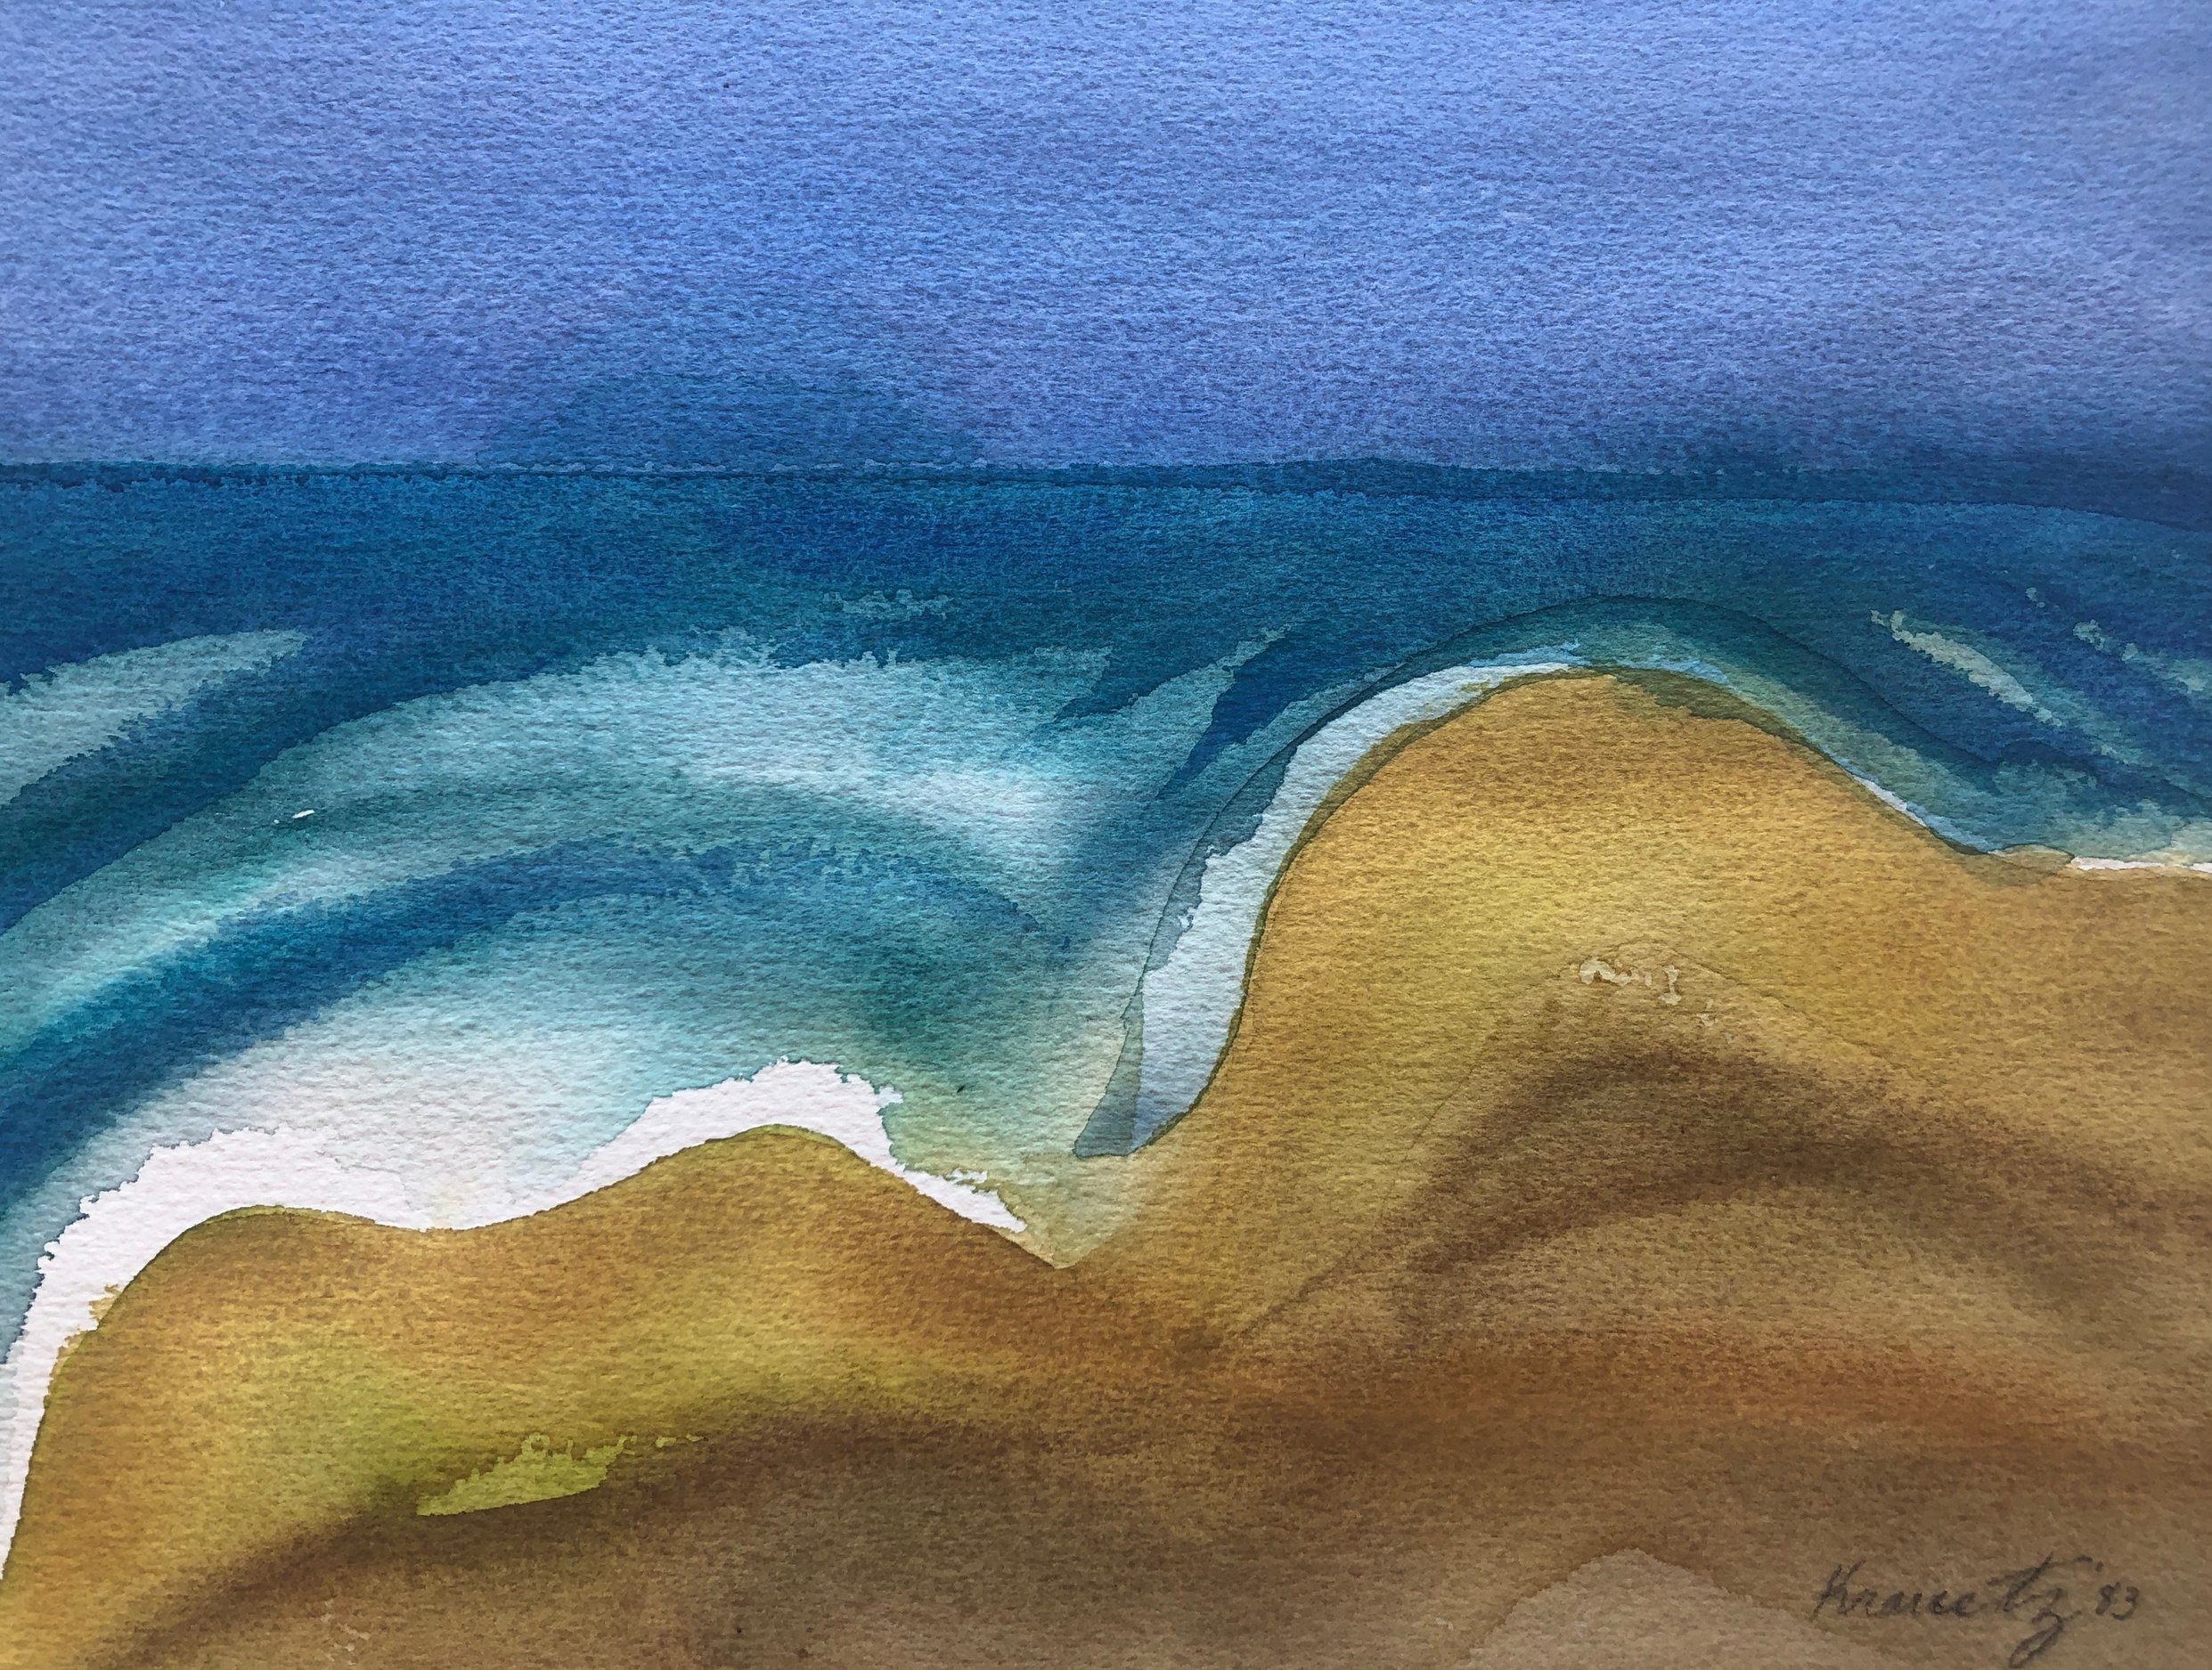 Dunes, Sea and Sky, 1989, Watercolor, 18x22 inches with mat